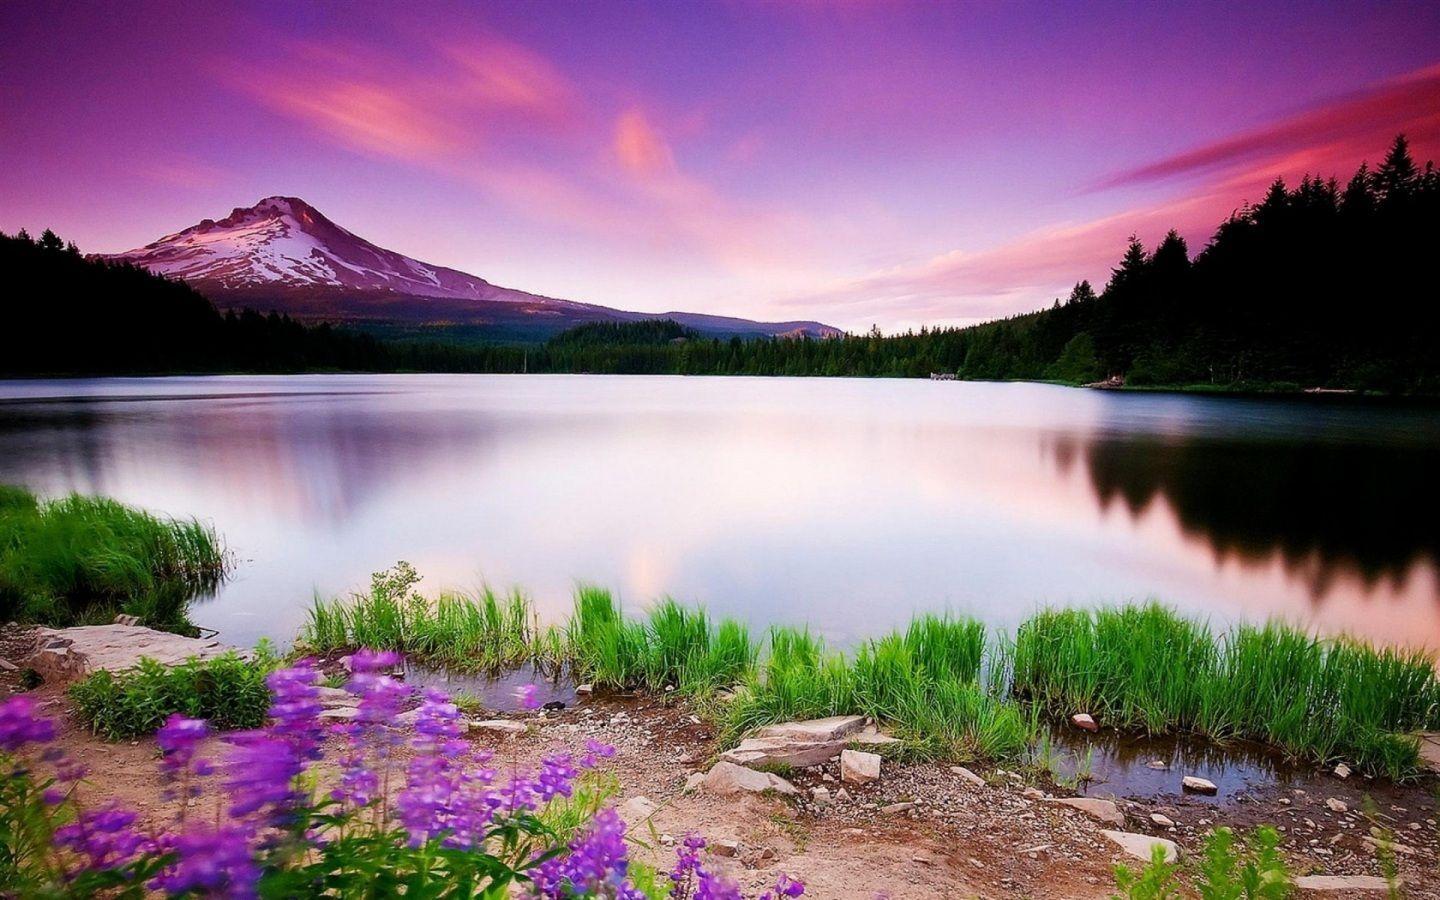 Pretty Scenery Wallpapers - Top Free Pretty Scenery Backgrounds